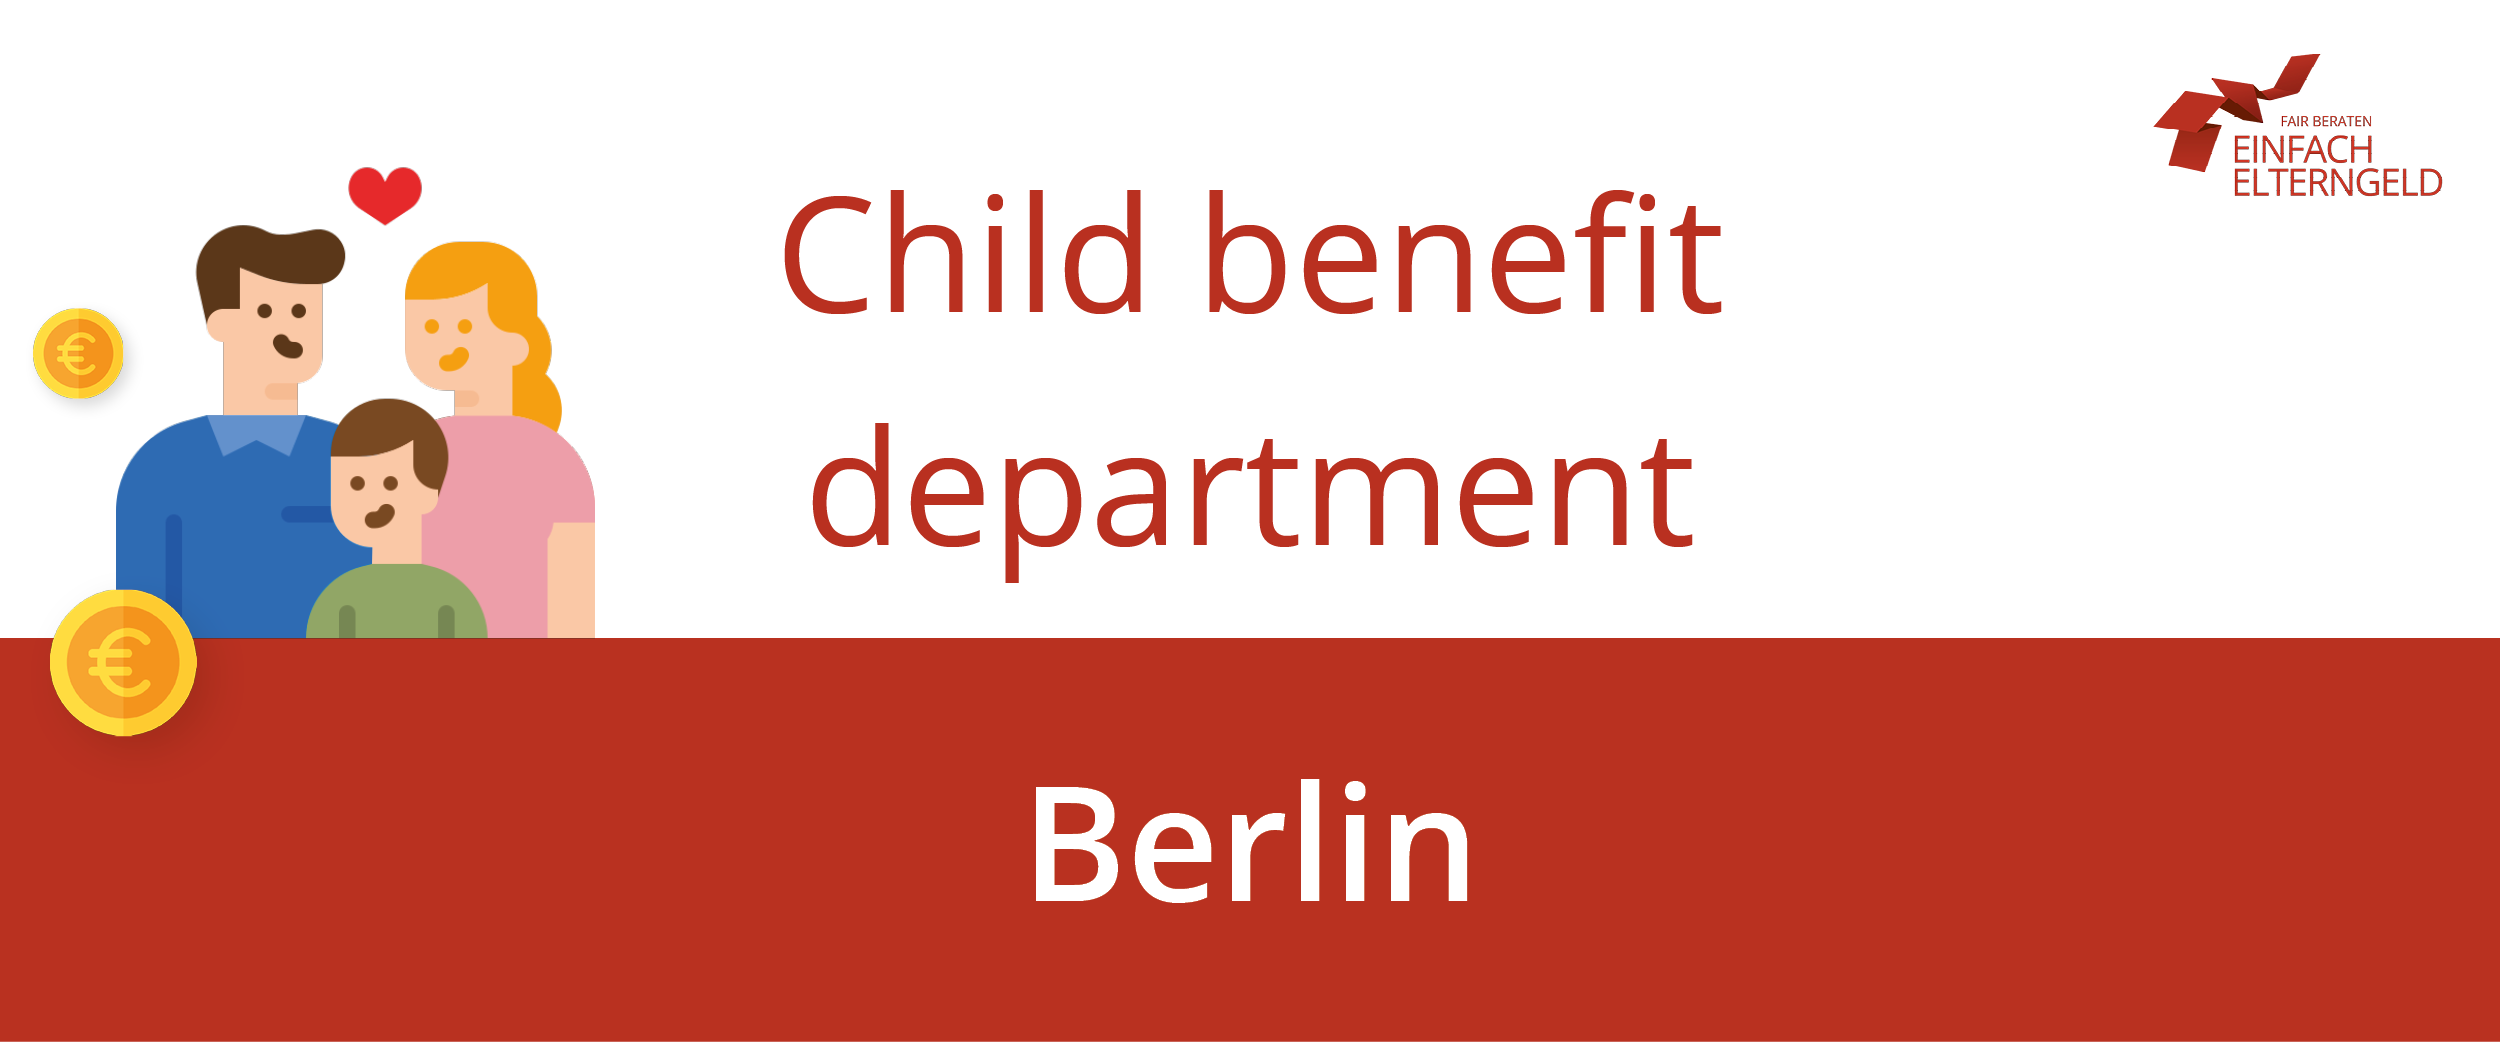 We introduce you to the child benefit department of Berlin.